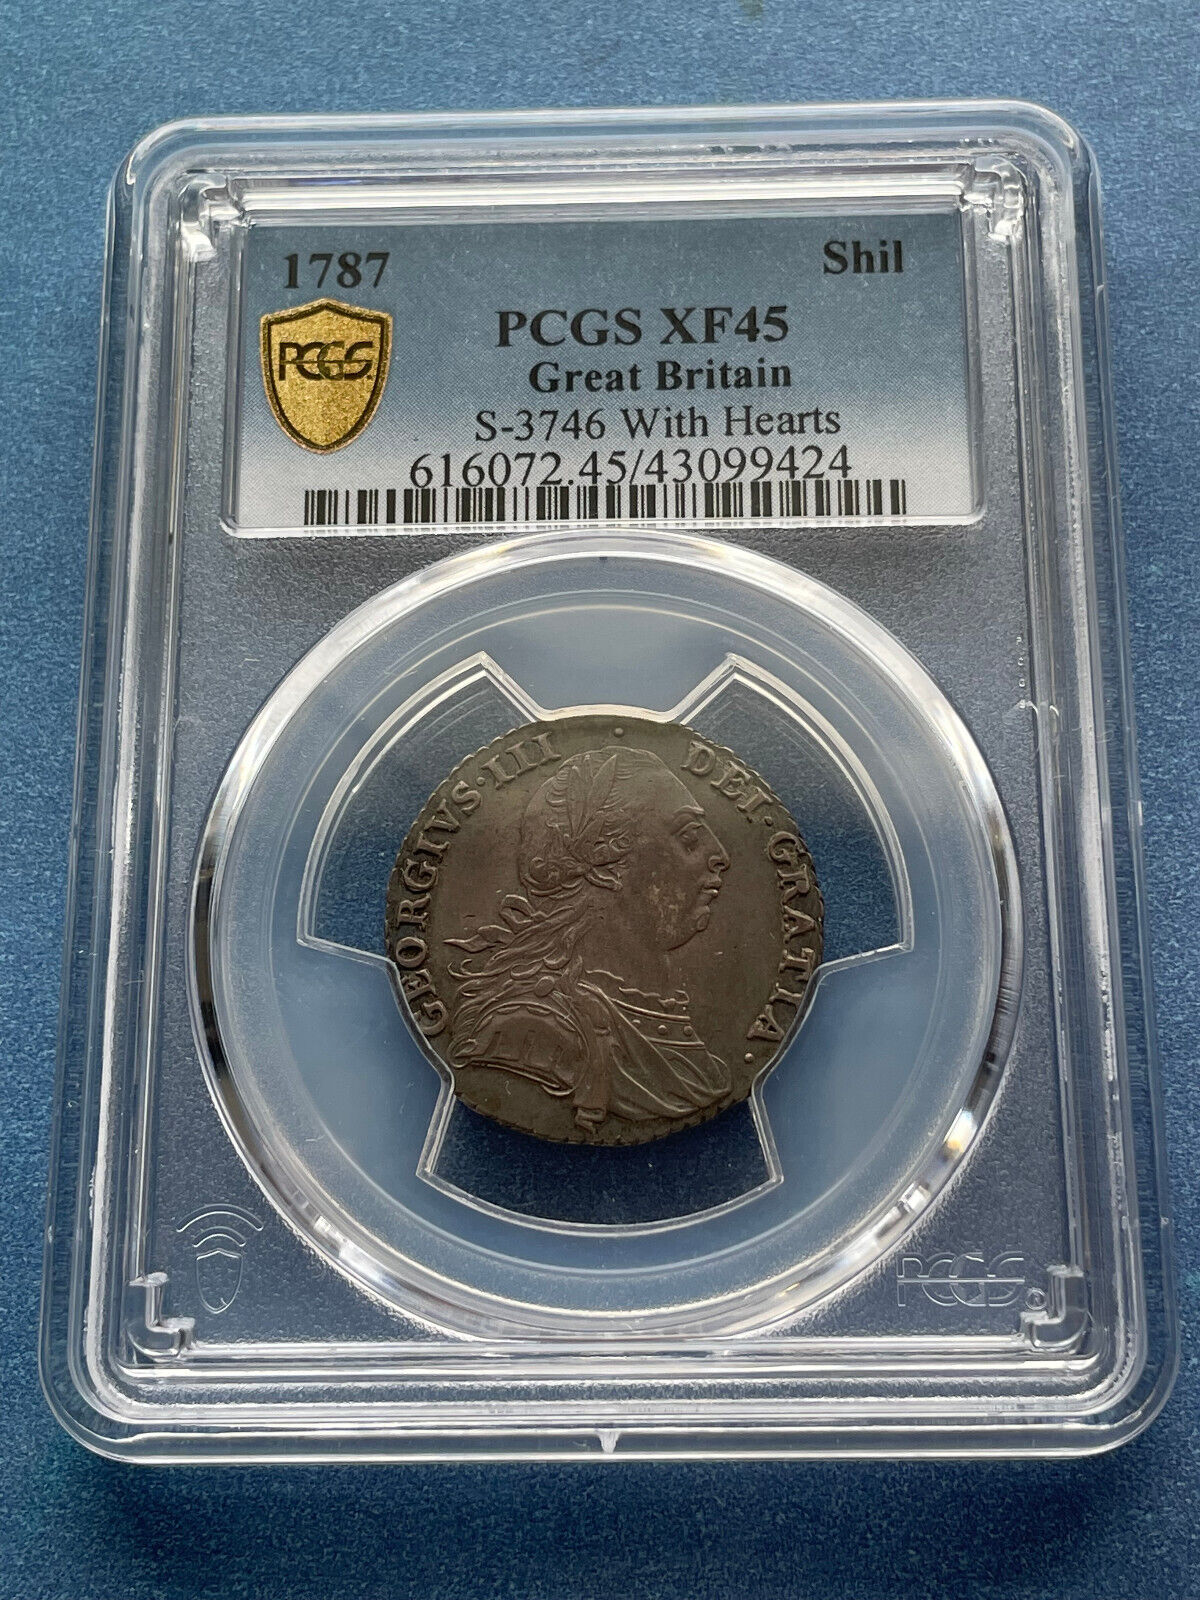 Great Britain. George Iii. 1787 Ar Shilling. Pcgs Xf45.  Scbc-3746 With Hearts